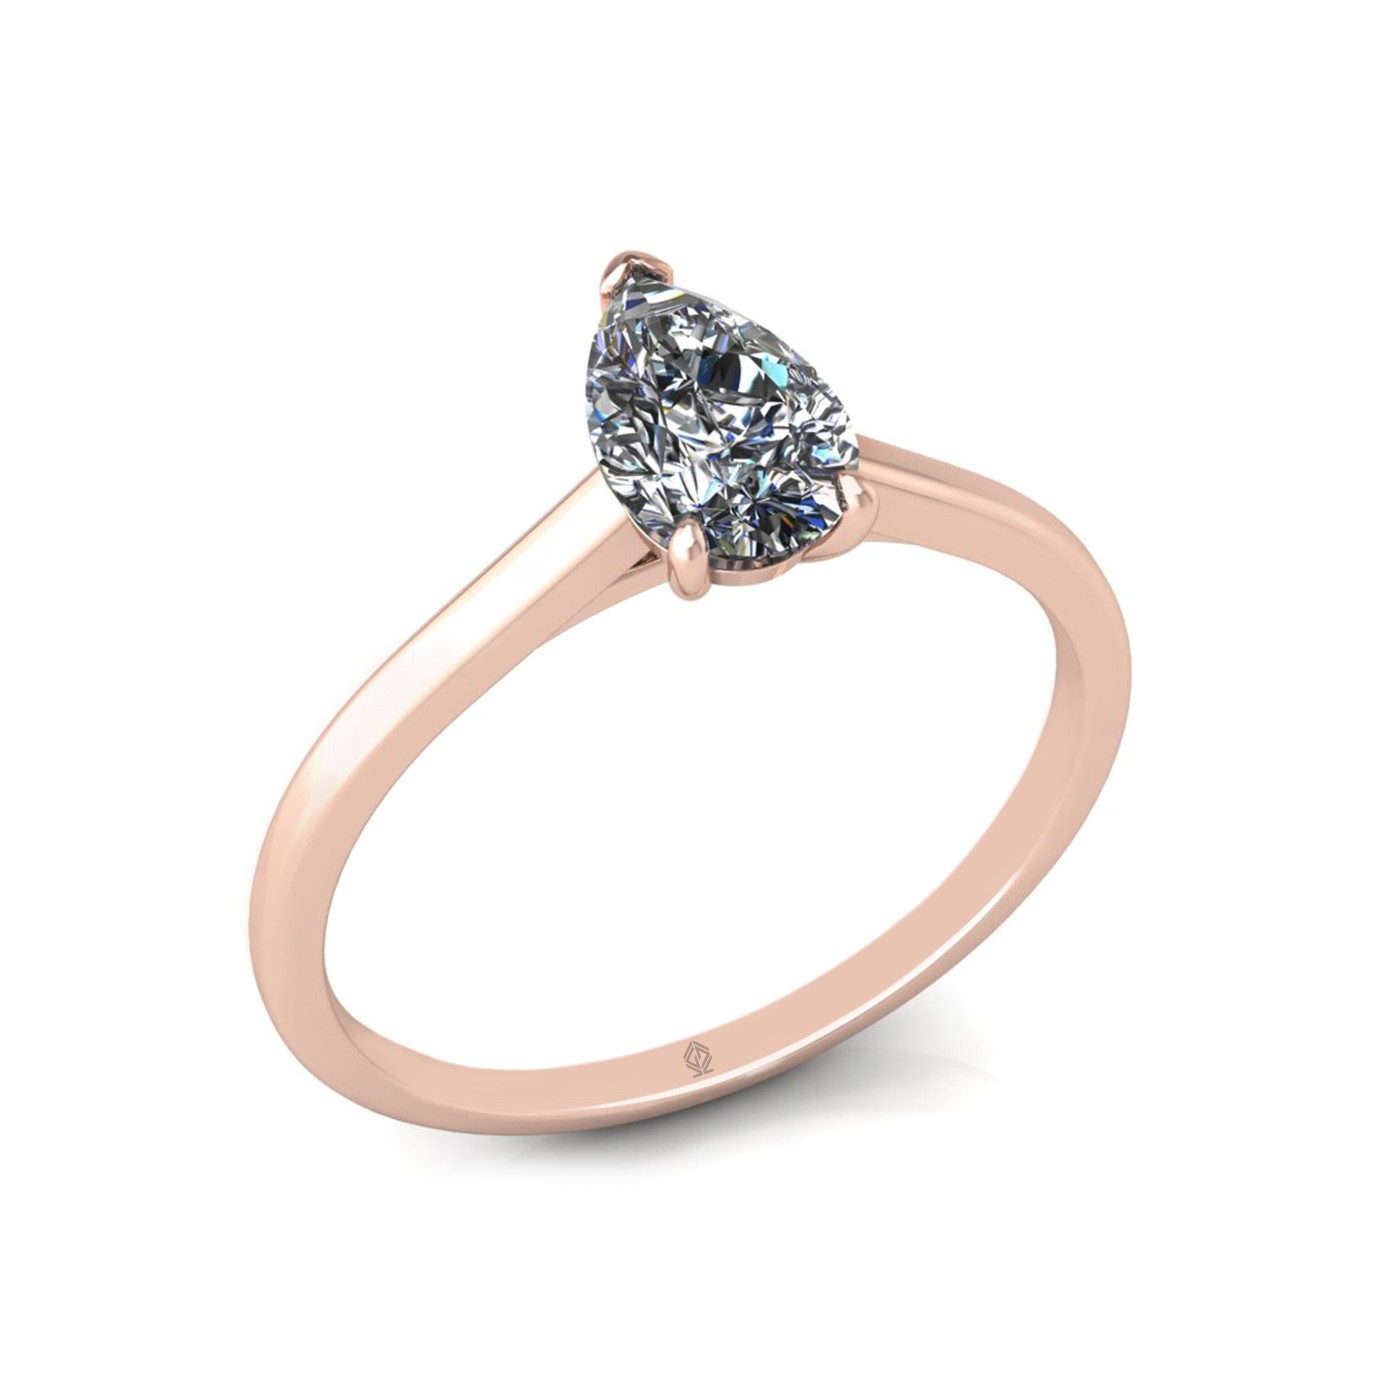 18k rose gold  0,80 ct 3 prongs solitaire pear cut diamond engagement ring with whisper thin band